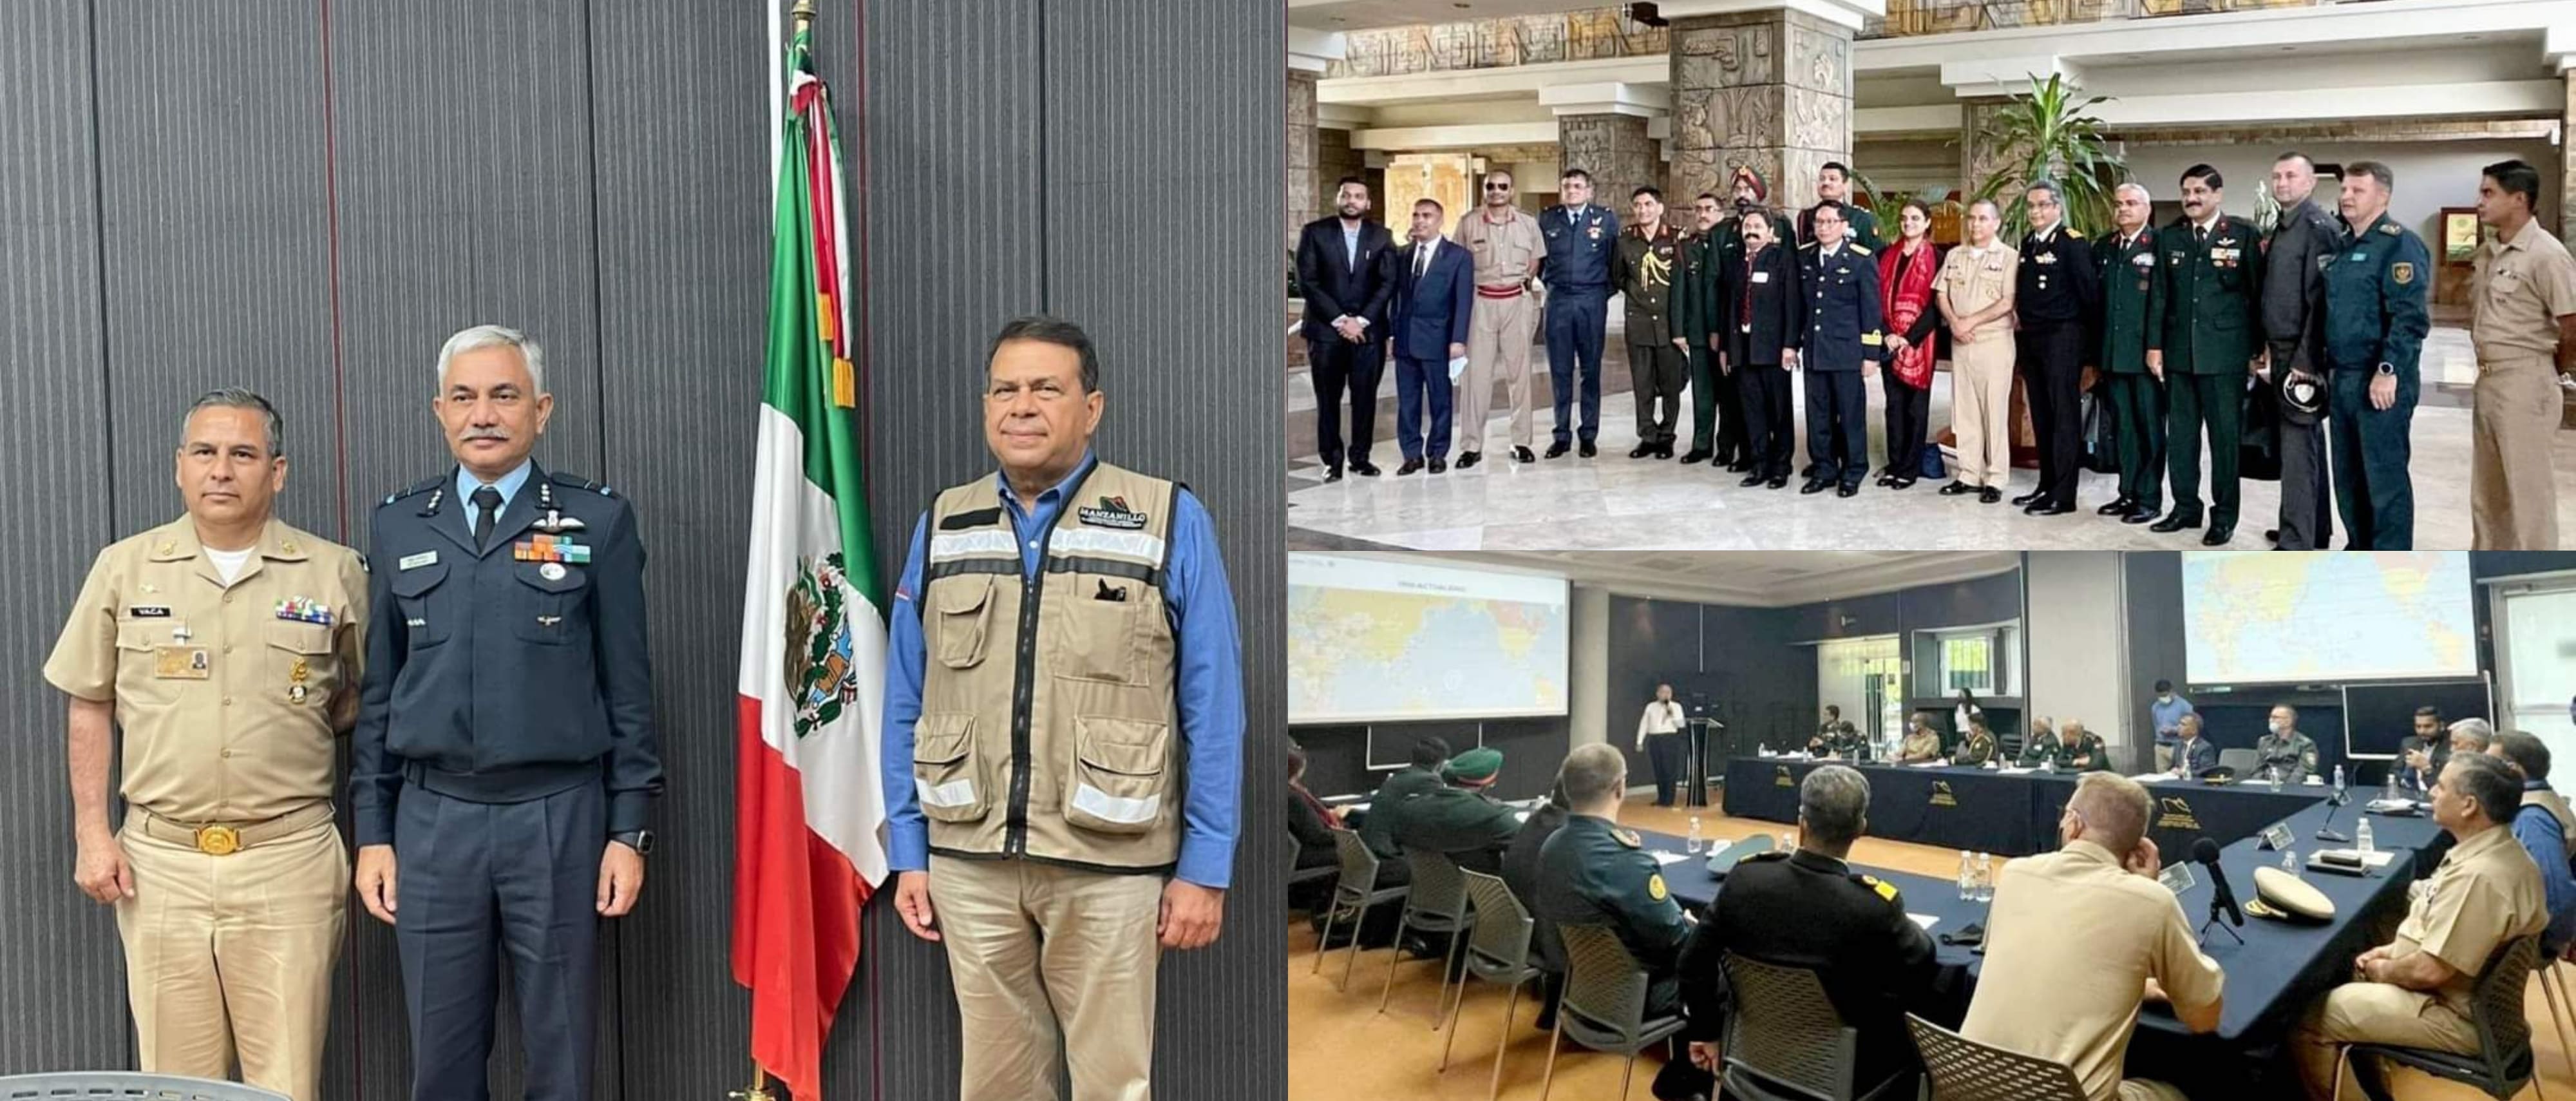  National Defense College (NDC) delegation from India visited the Mexican naval facility at Port Manzanillo. They were briefed through a presentation on the history, management, strategic and commercial importance of Port Manzanillo.